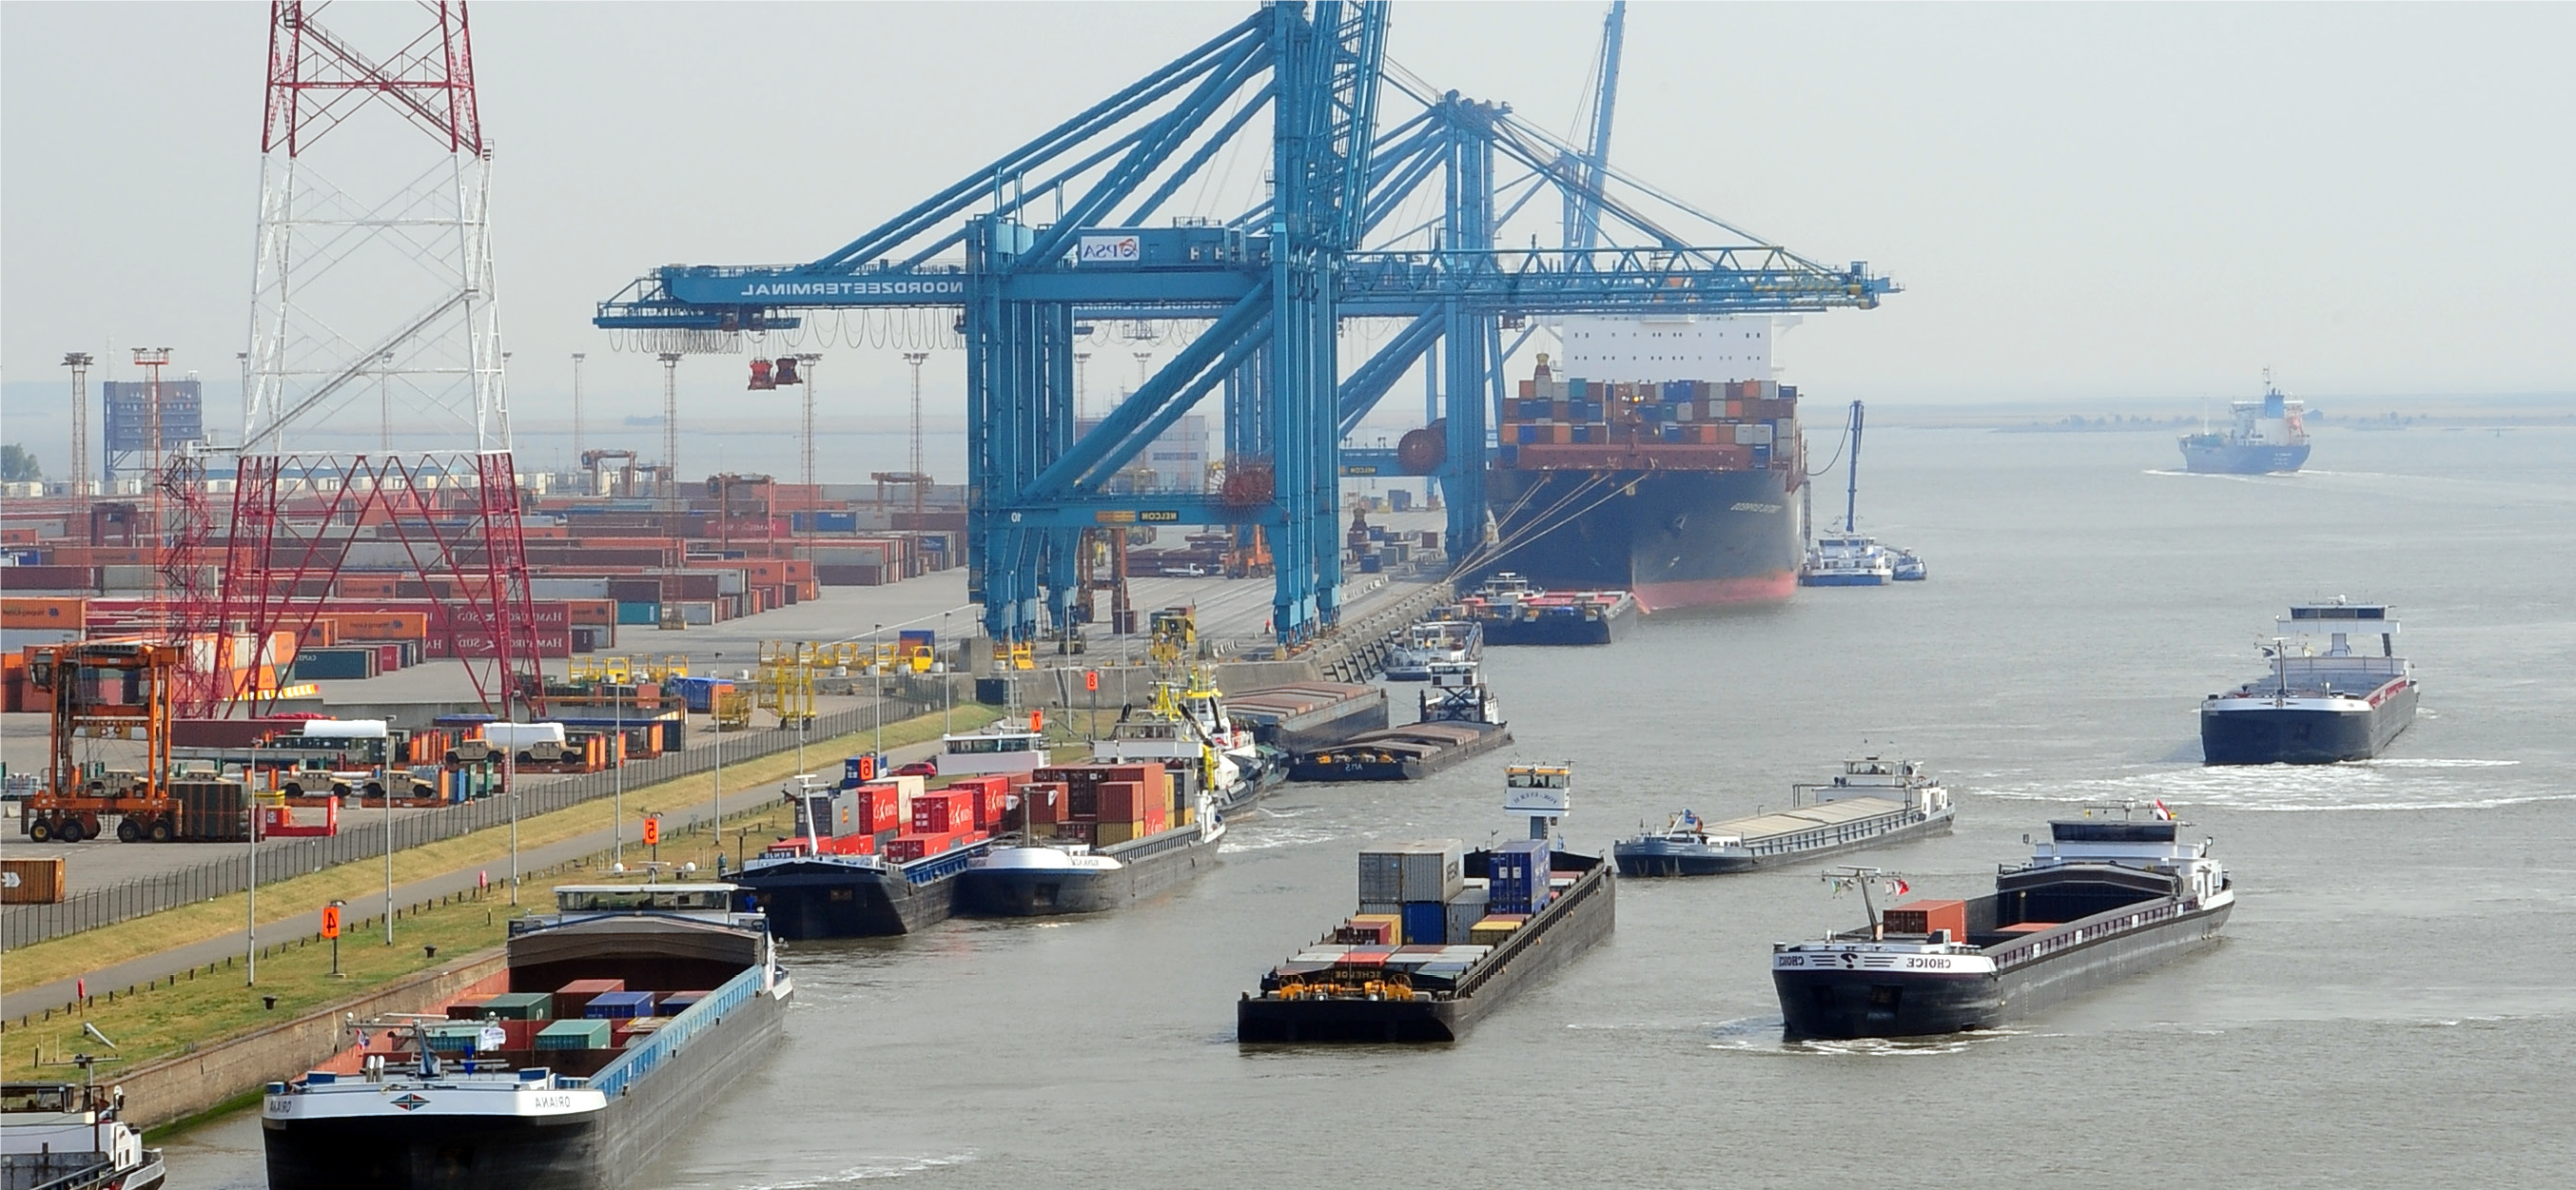 Urgent need to expand container capacity in the Port of Antwerp – Realy?